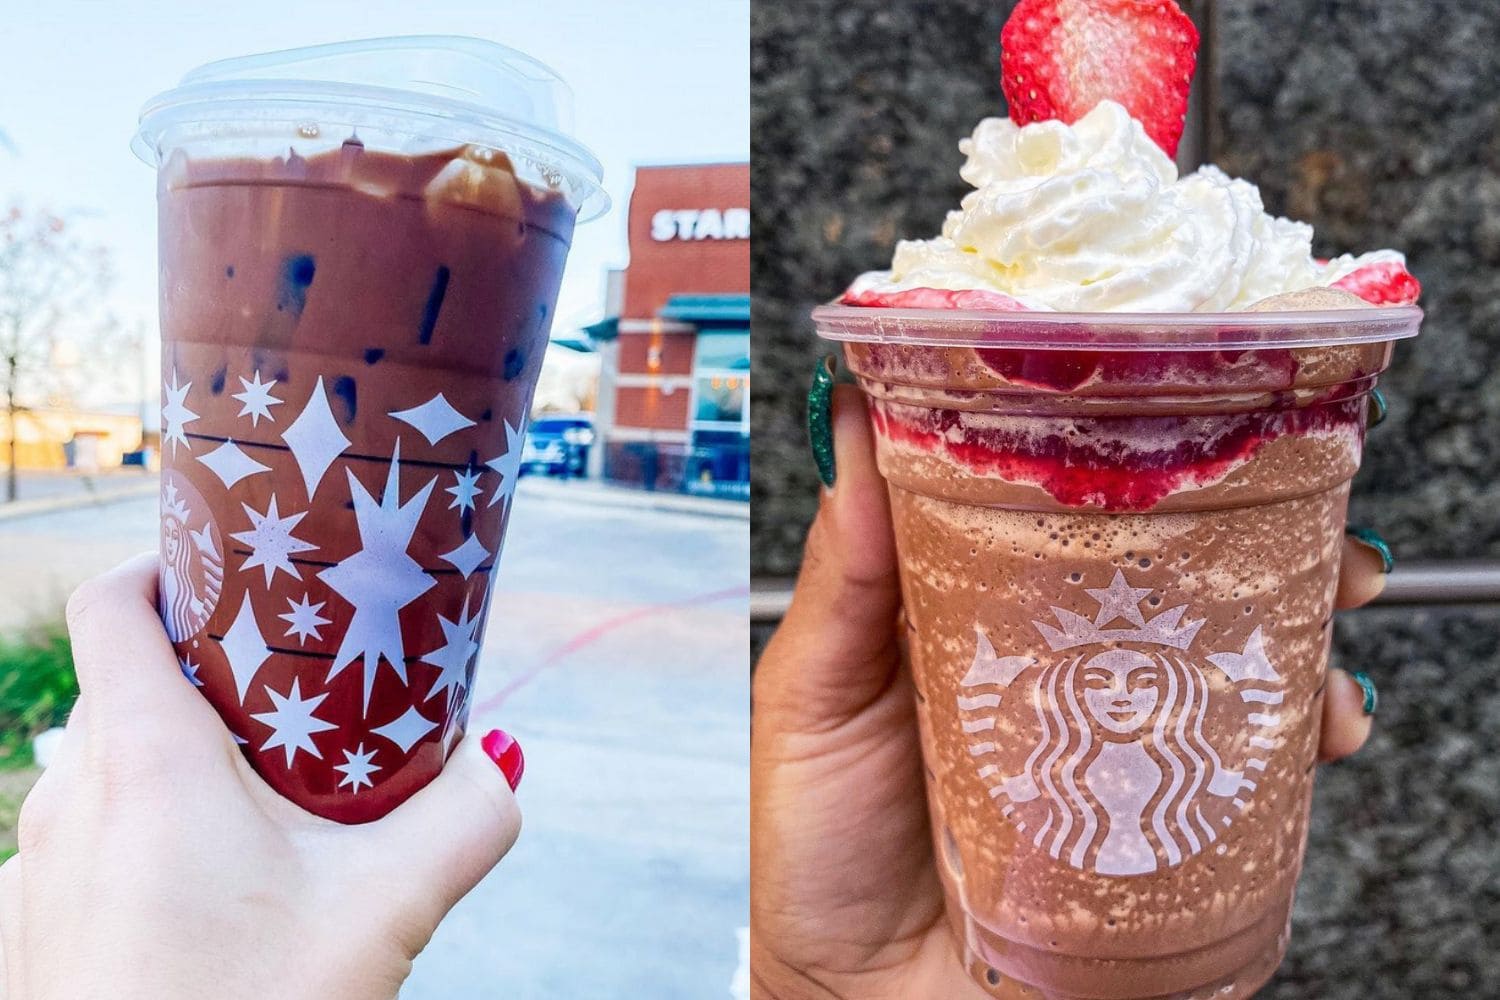 This Year, You Can Order 2 Vegan Holiday Drinks at Starbucks